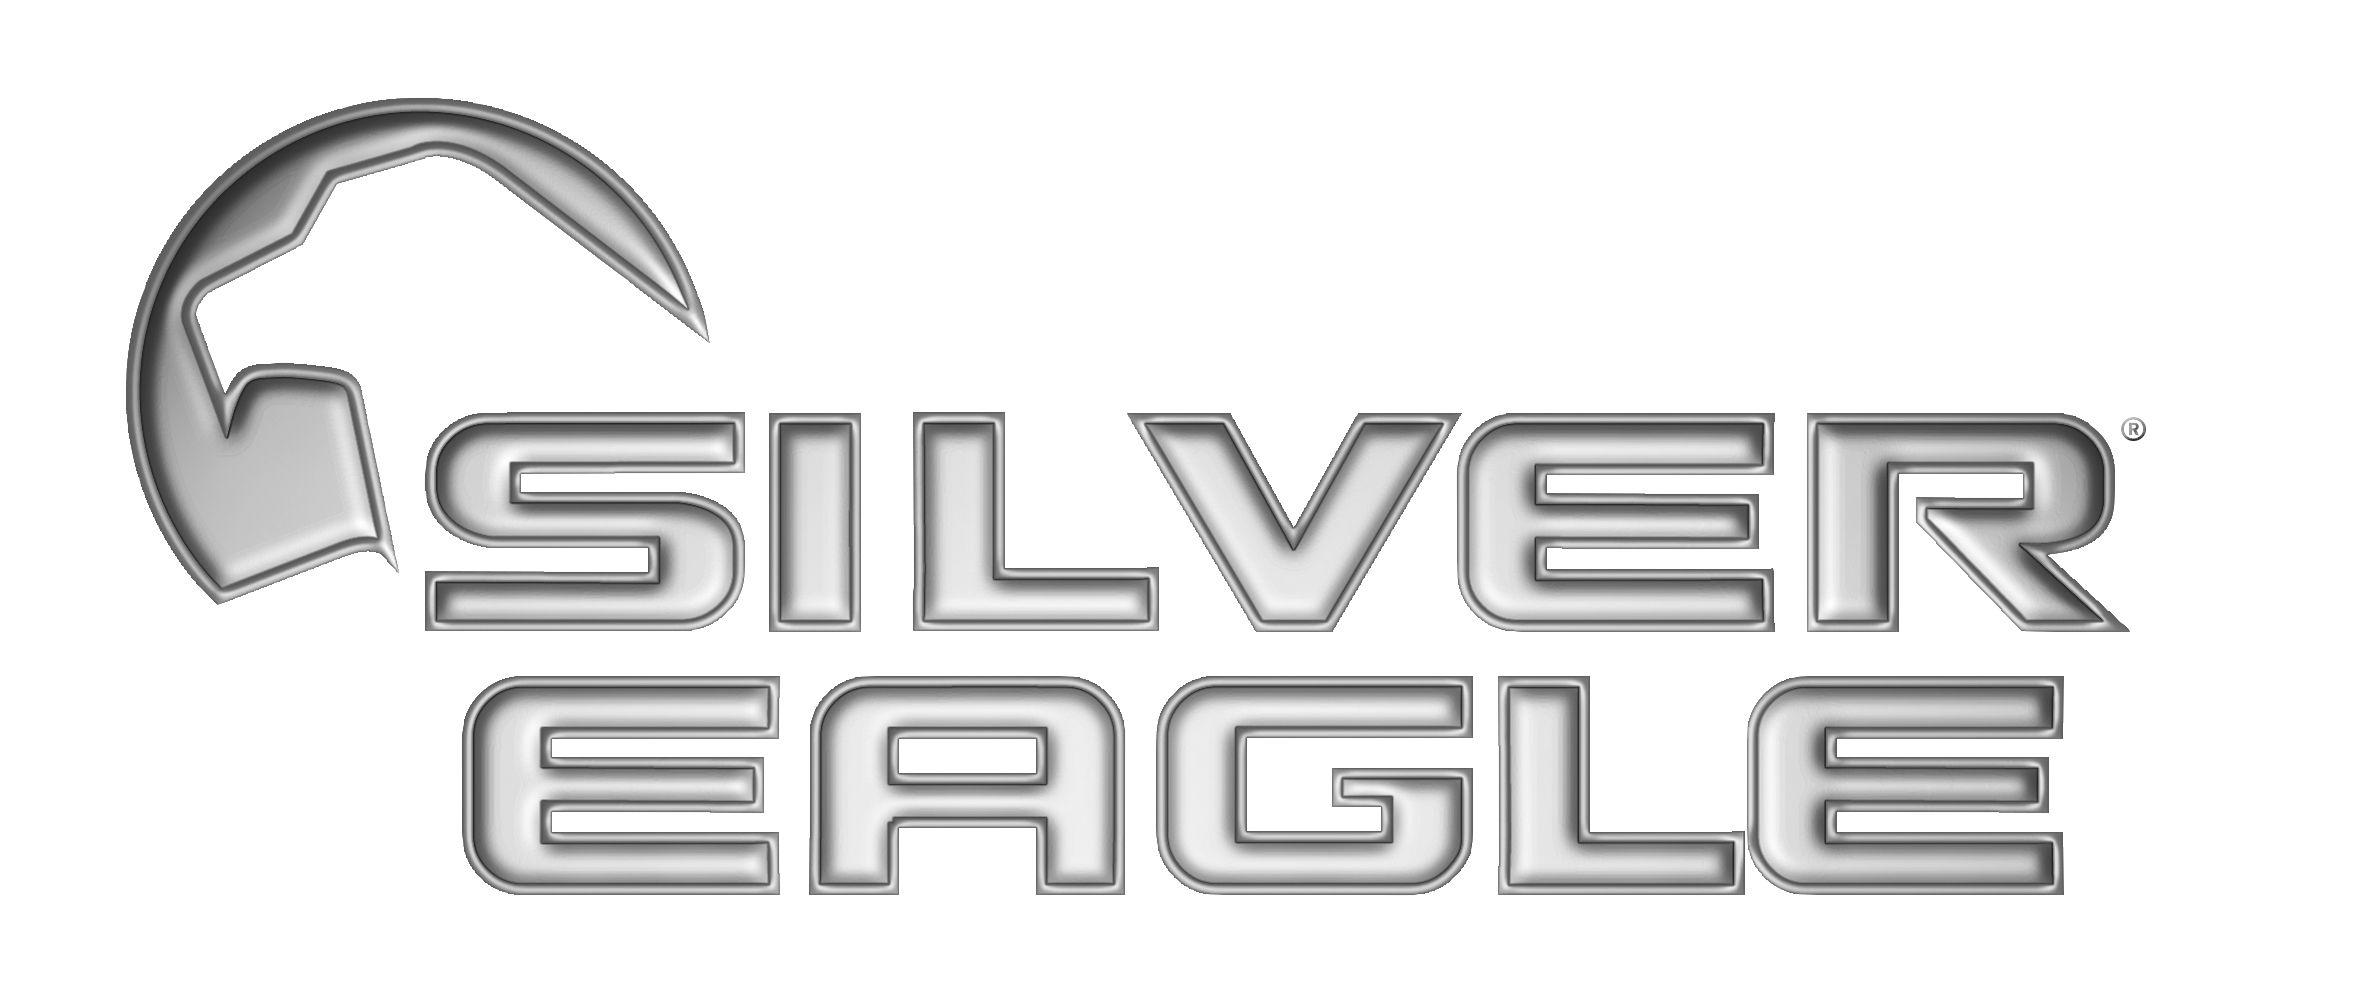 Silver Eagle Logo - Hand Tools & Automotive Tools | Franchise Business Opportunities ...